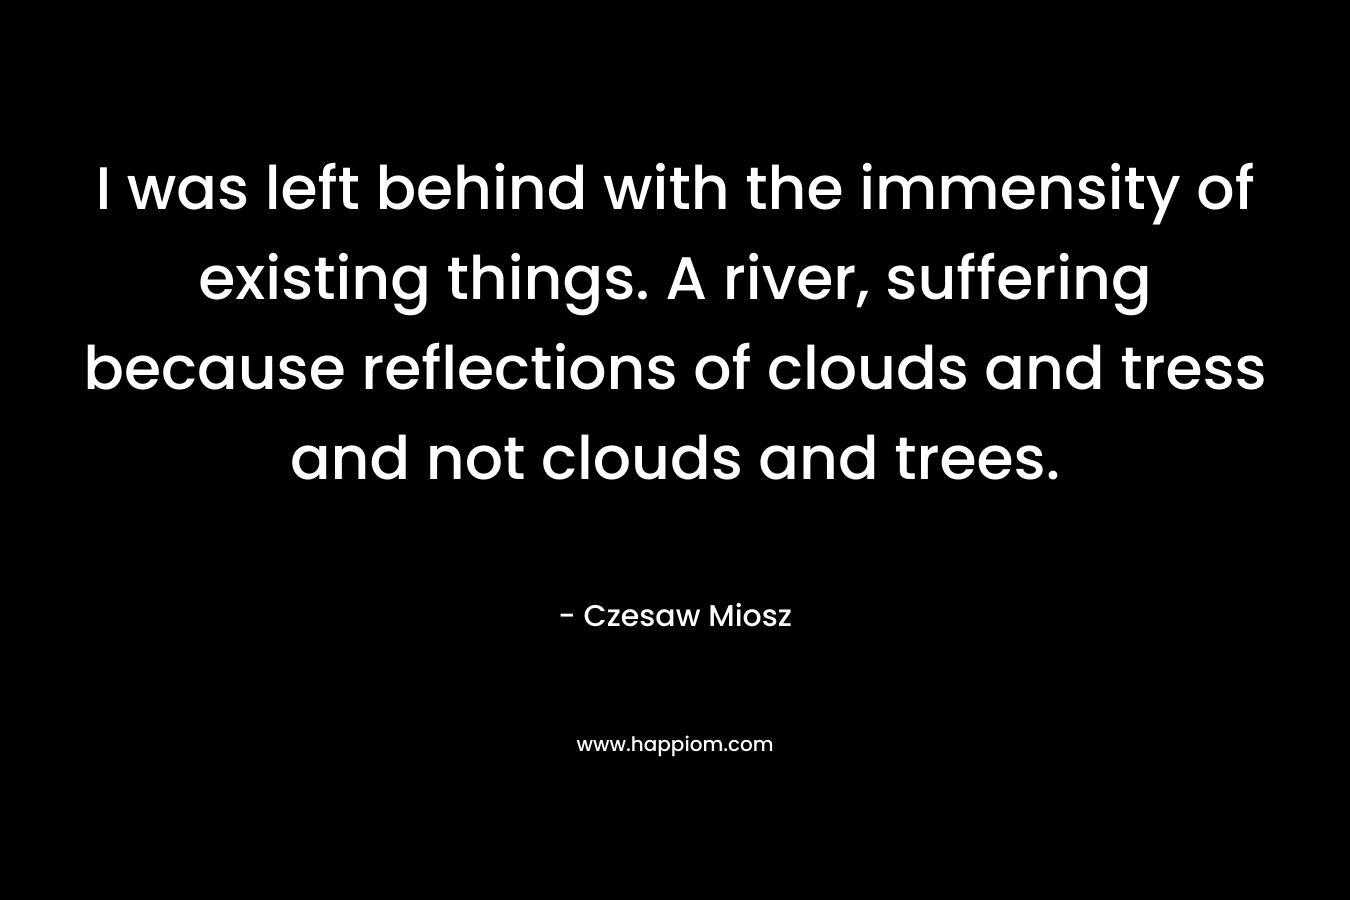 I was left behind with the immensity of existing things. A river, suffering because reflections of clouds and tress and not clouds and trees.